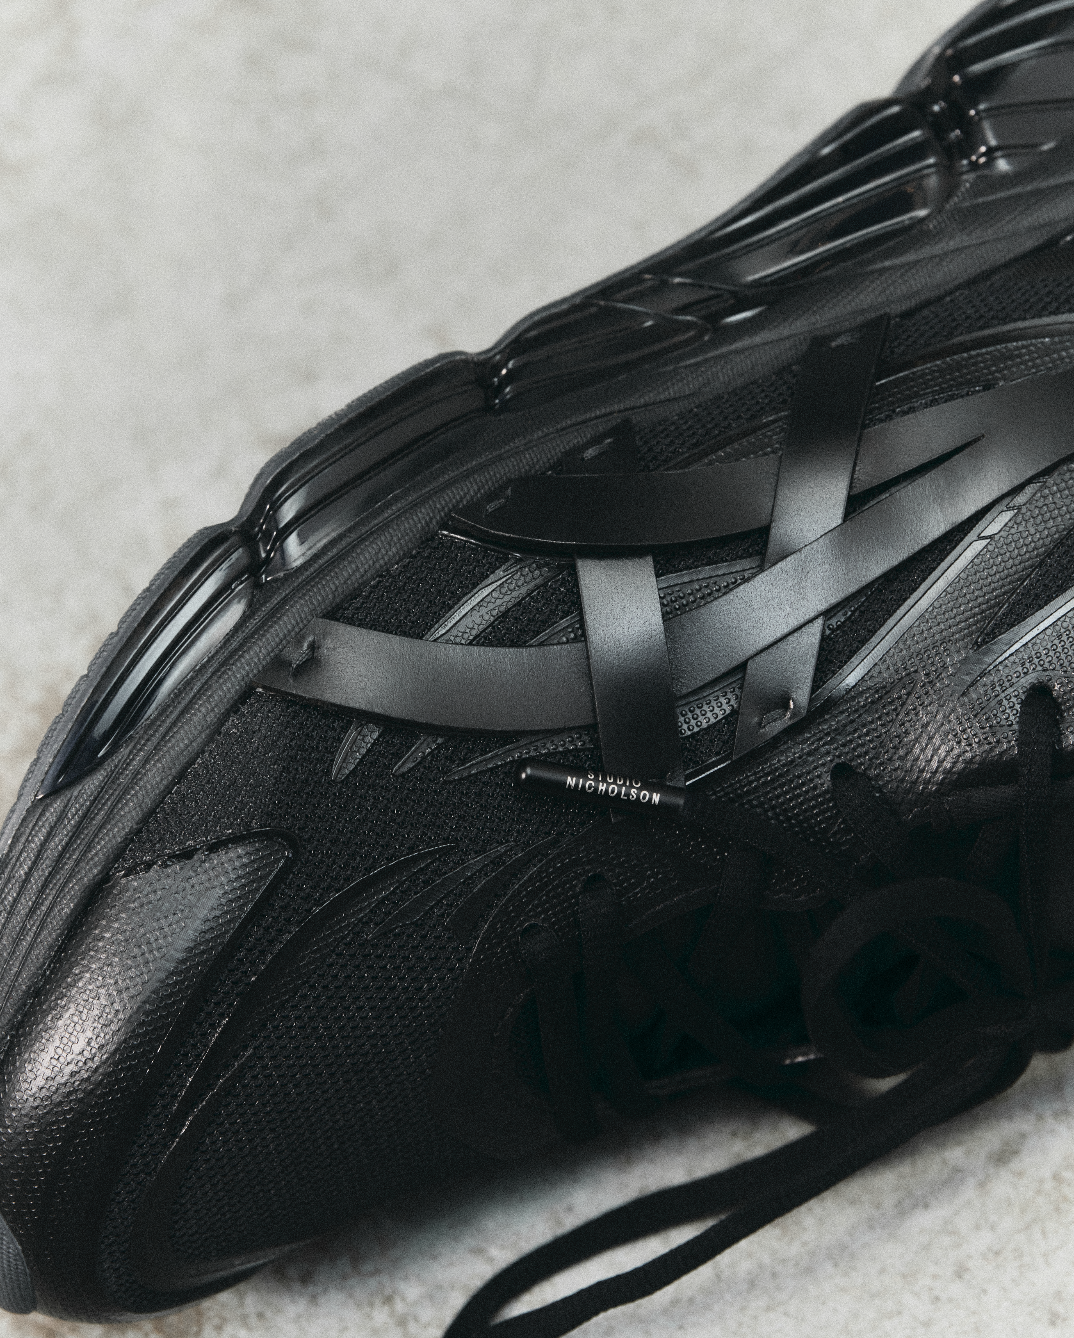 Studio Nicholson's ASICS sneaker in black mesh and leather with branded shoelaces